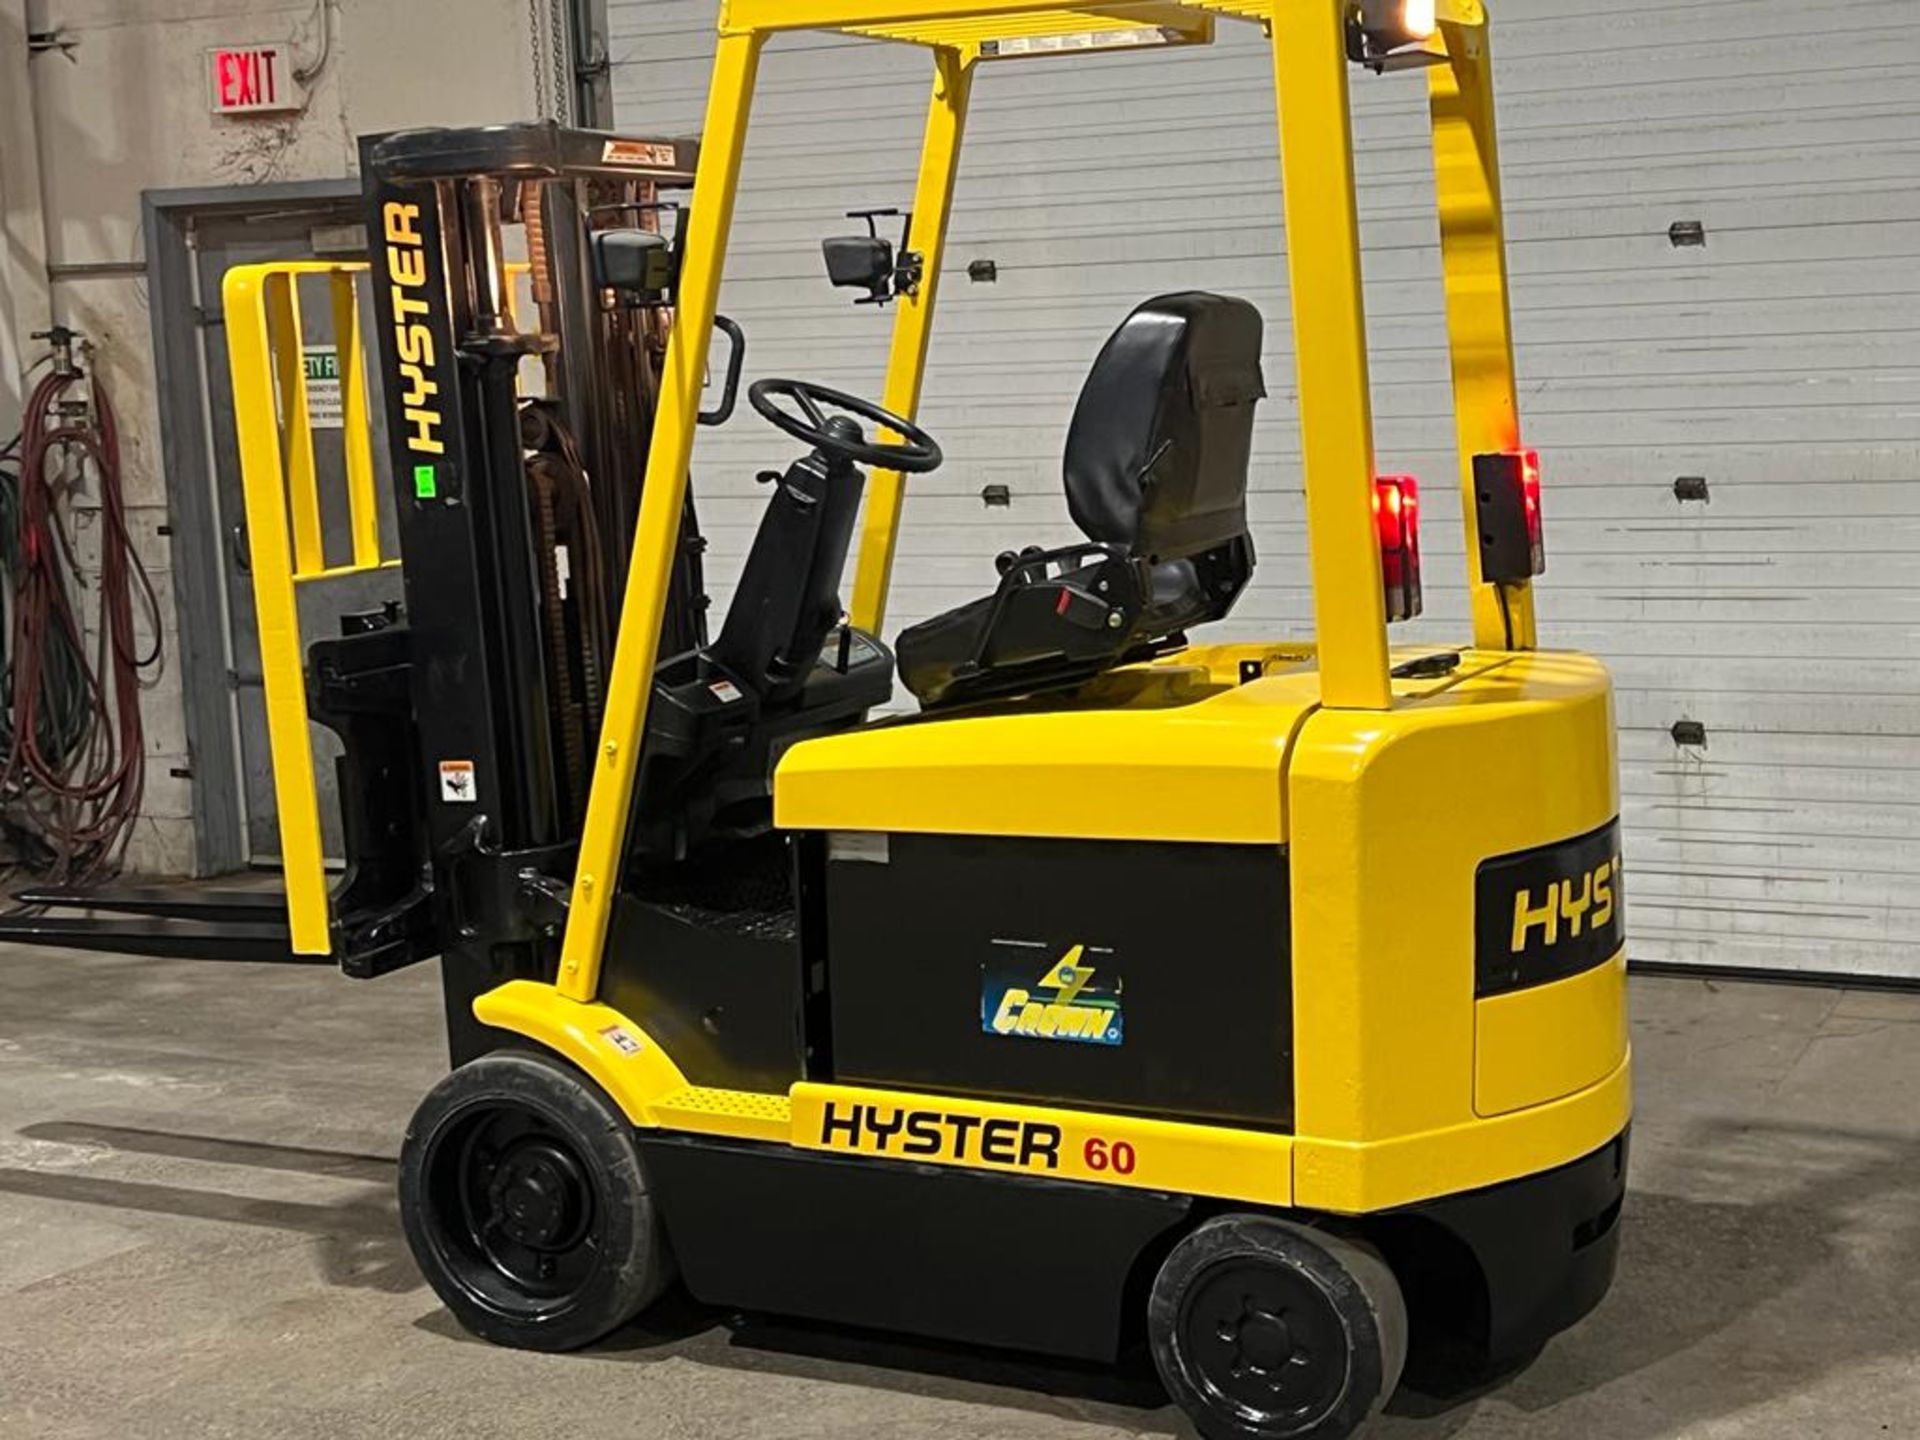 Hyster 60 - 6,000lbs Capacity Forklift Electric with Sideshift & 3 stage mast and Very Low Hours 48V - Image 2 of 3